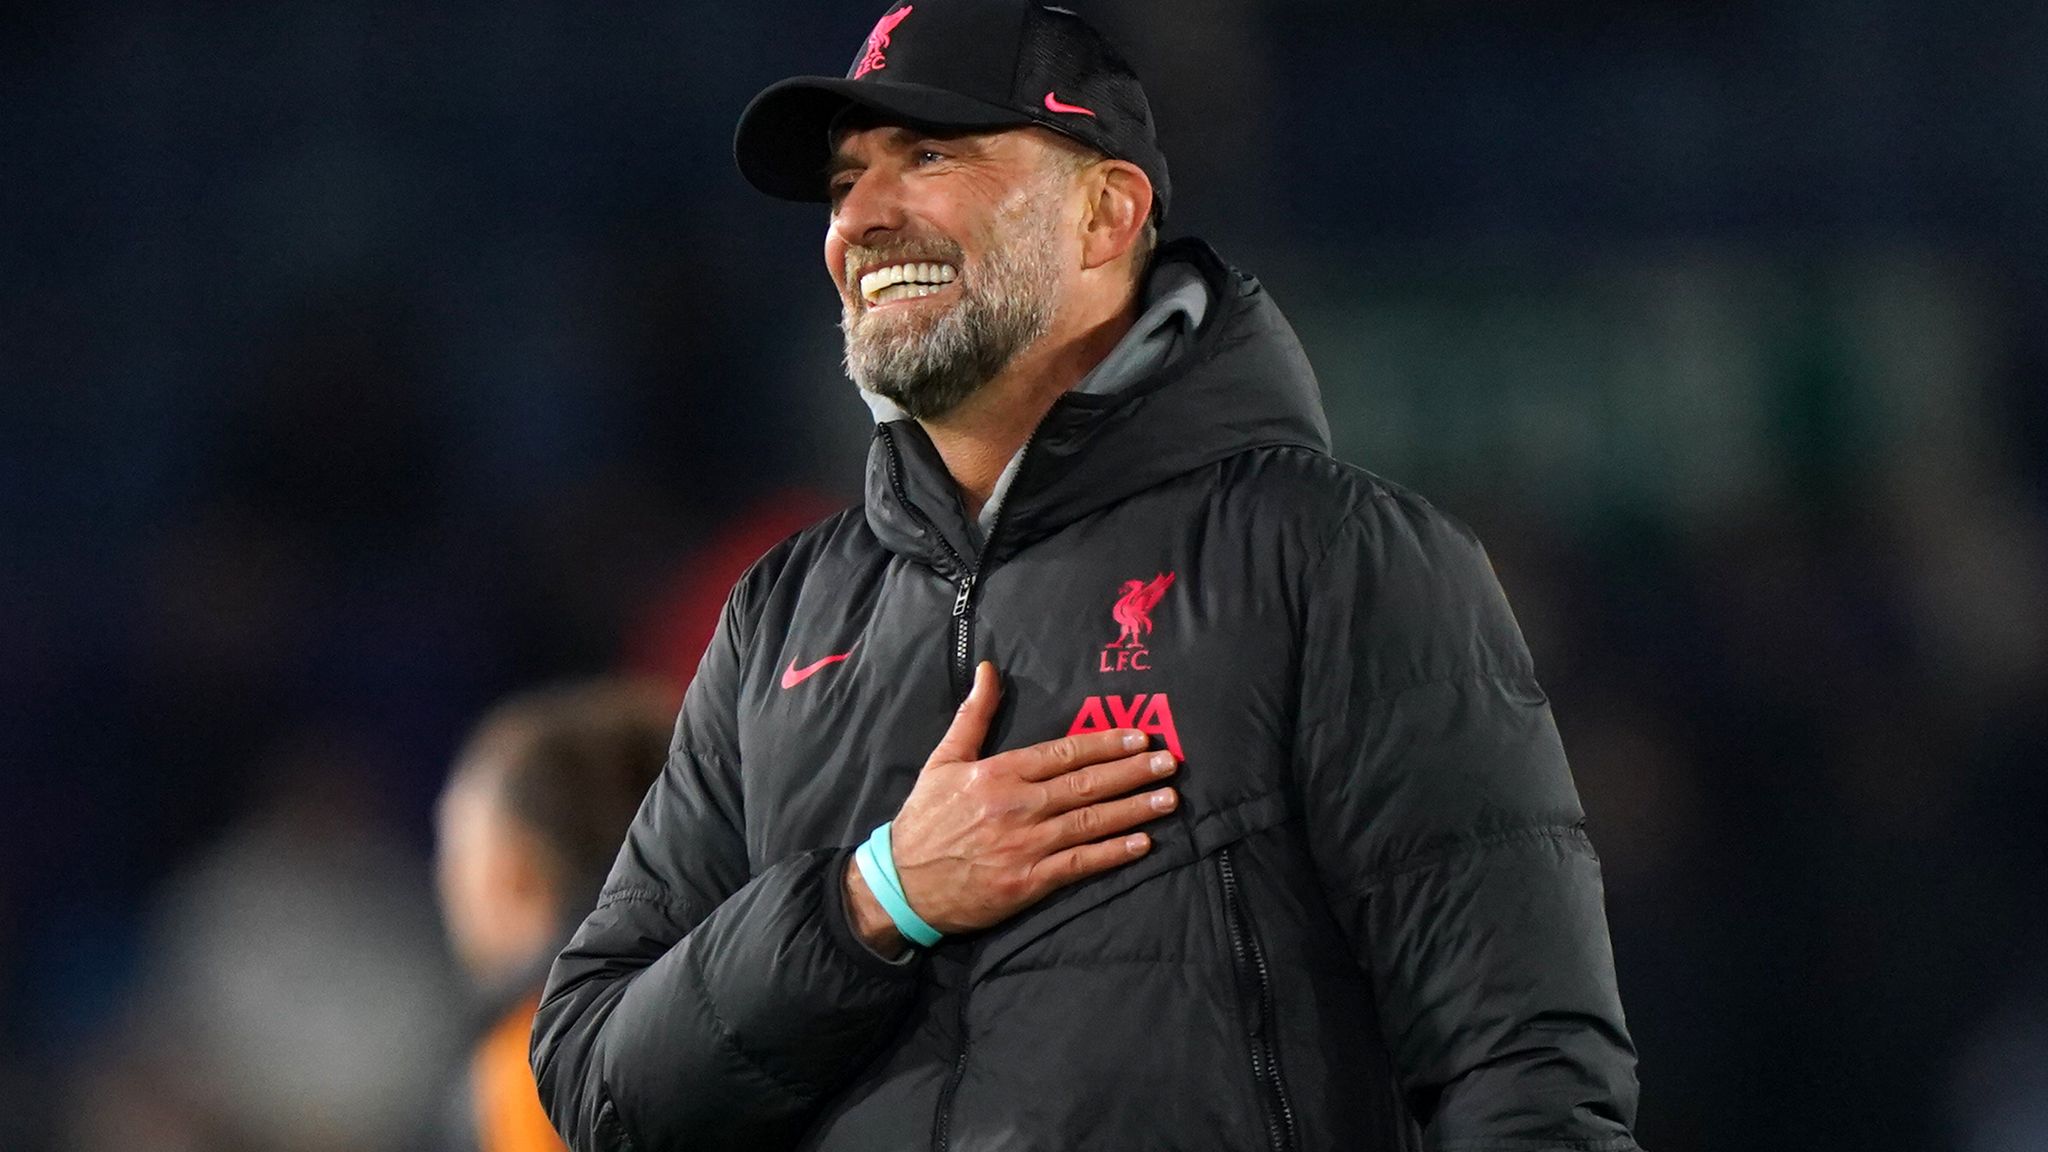 Jurgen Klopp says Liverpool have clicked and are building something new  after 6-1 win at Leeds | Football News | Sky Sports